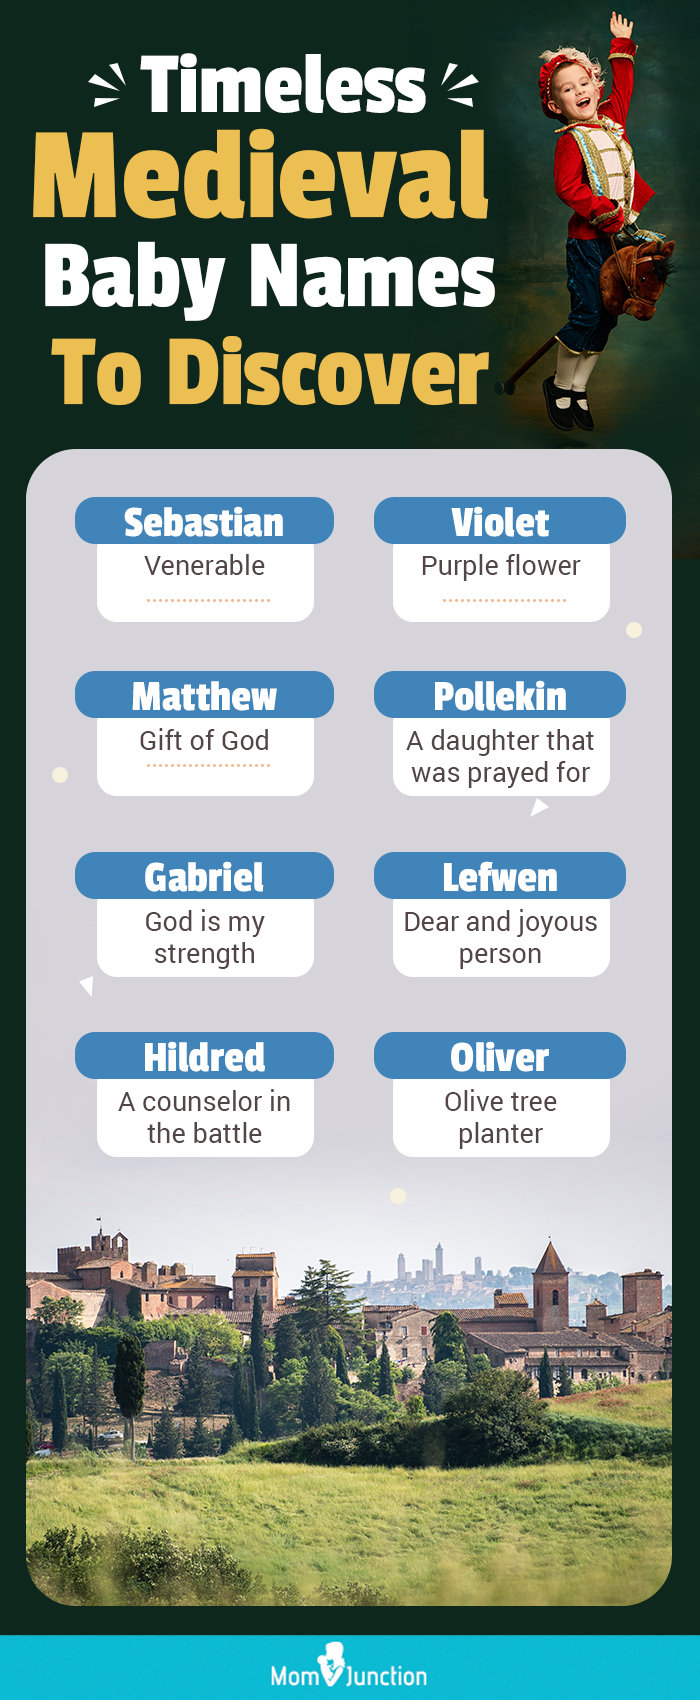 timeless medieval baby names to discover (infographic)